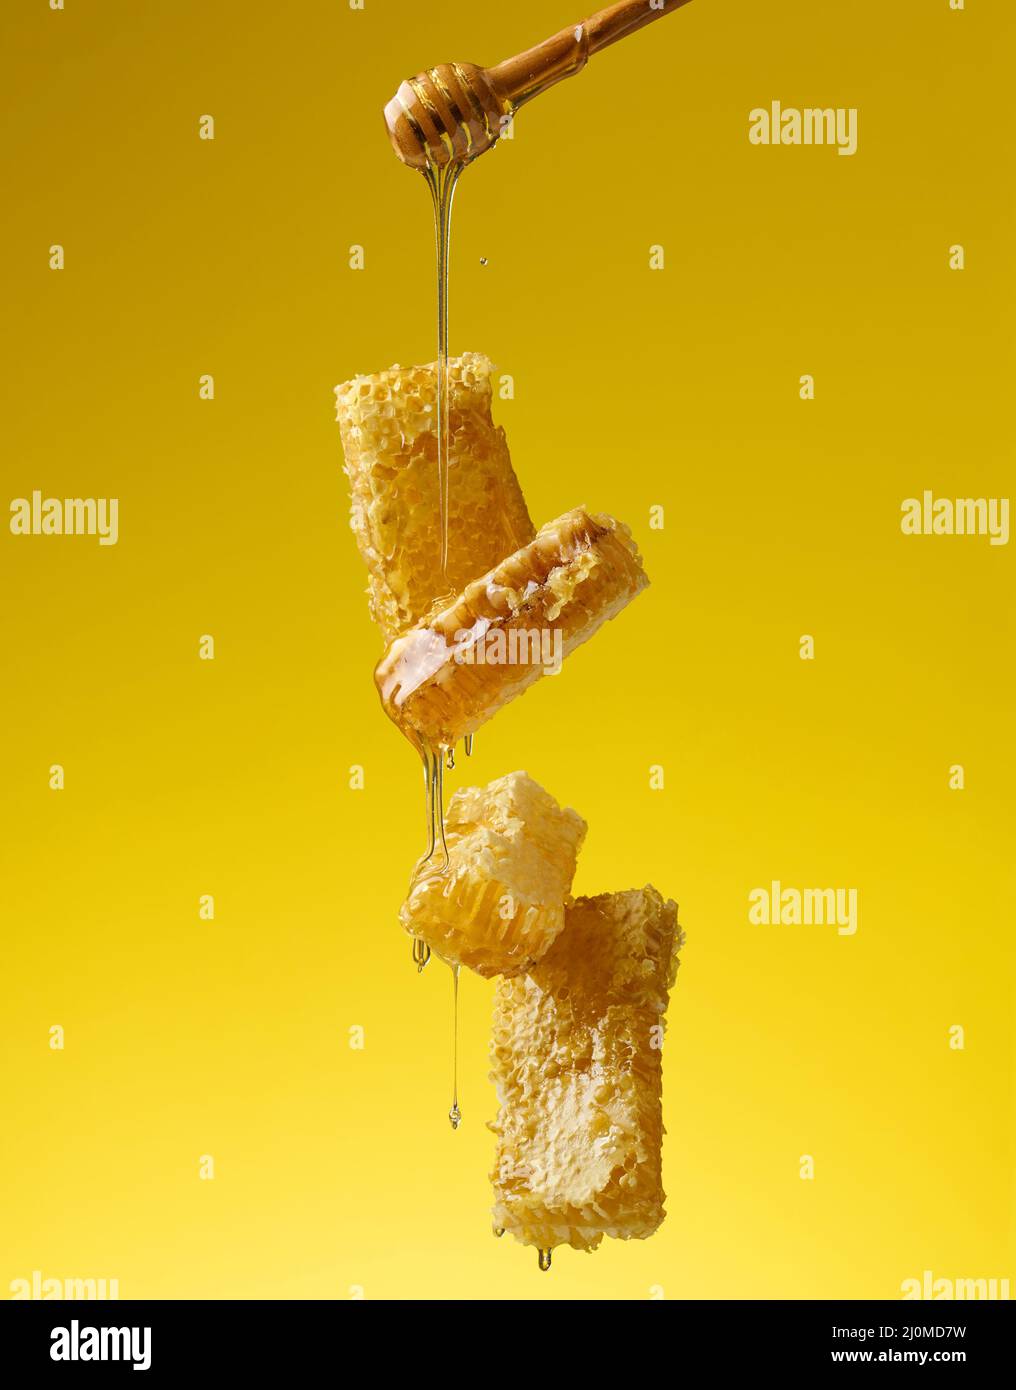 Pouring transparent sweet honey from a wooden stick on a wax honeycomb. Yellow background Stock Photo